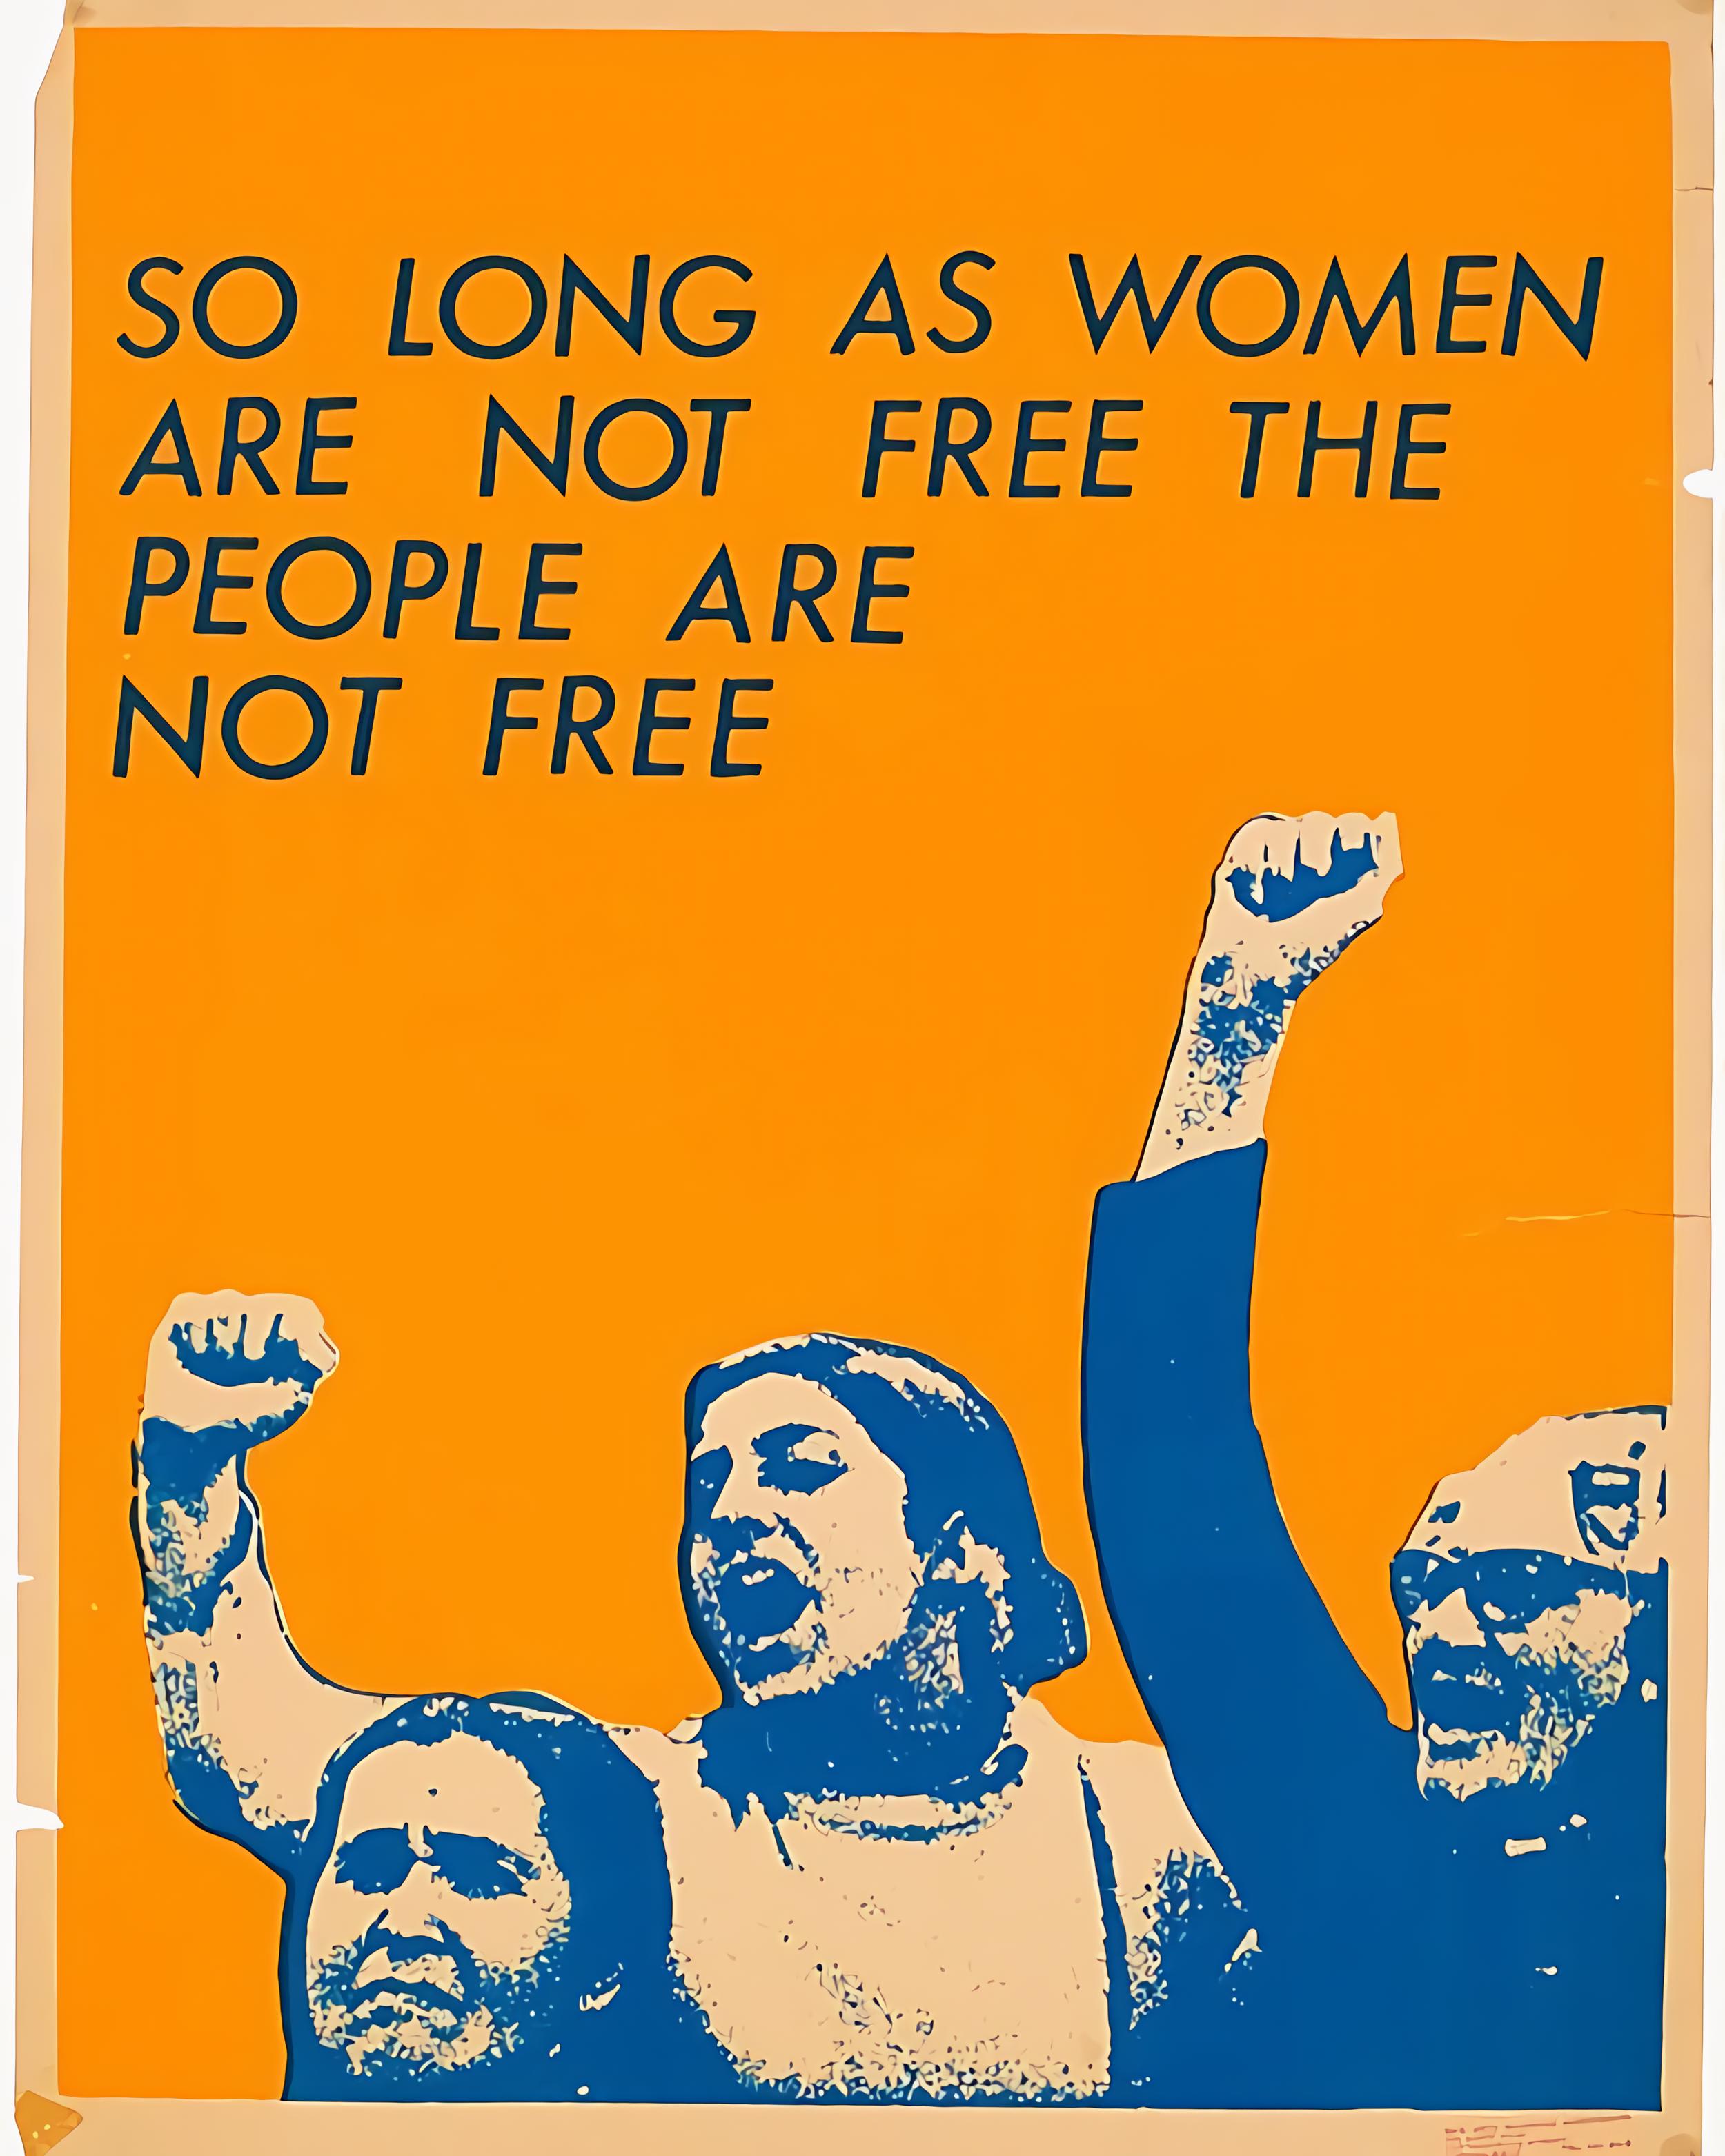 So long as women are not free the people are not free